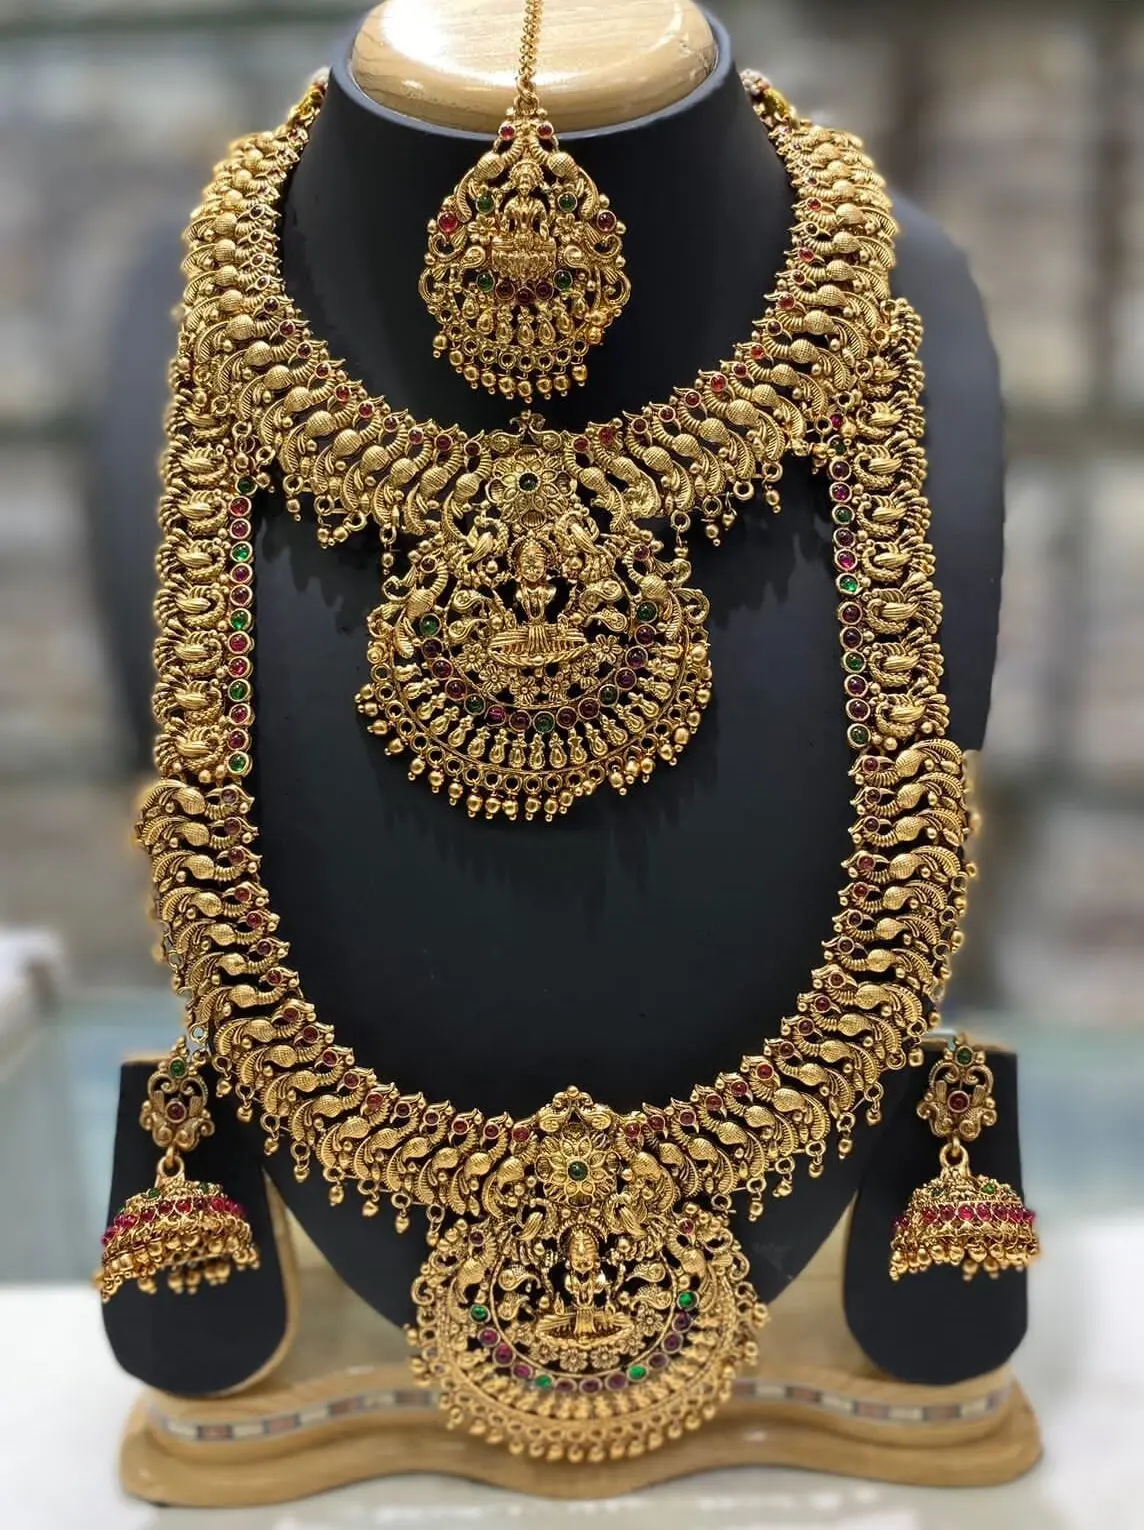 Temple Jewellery Divine Adornment Steeped in Tradition (1)  - Temple Jewellery Divine Adornment Steeped in Tradition 1 -